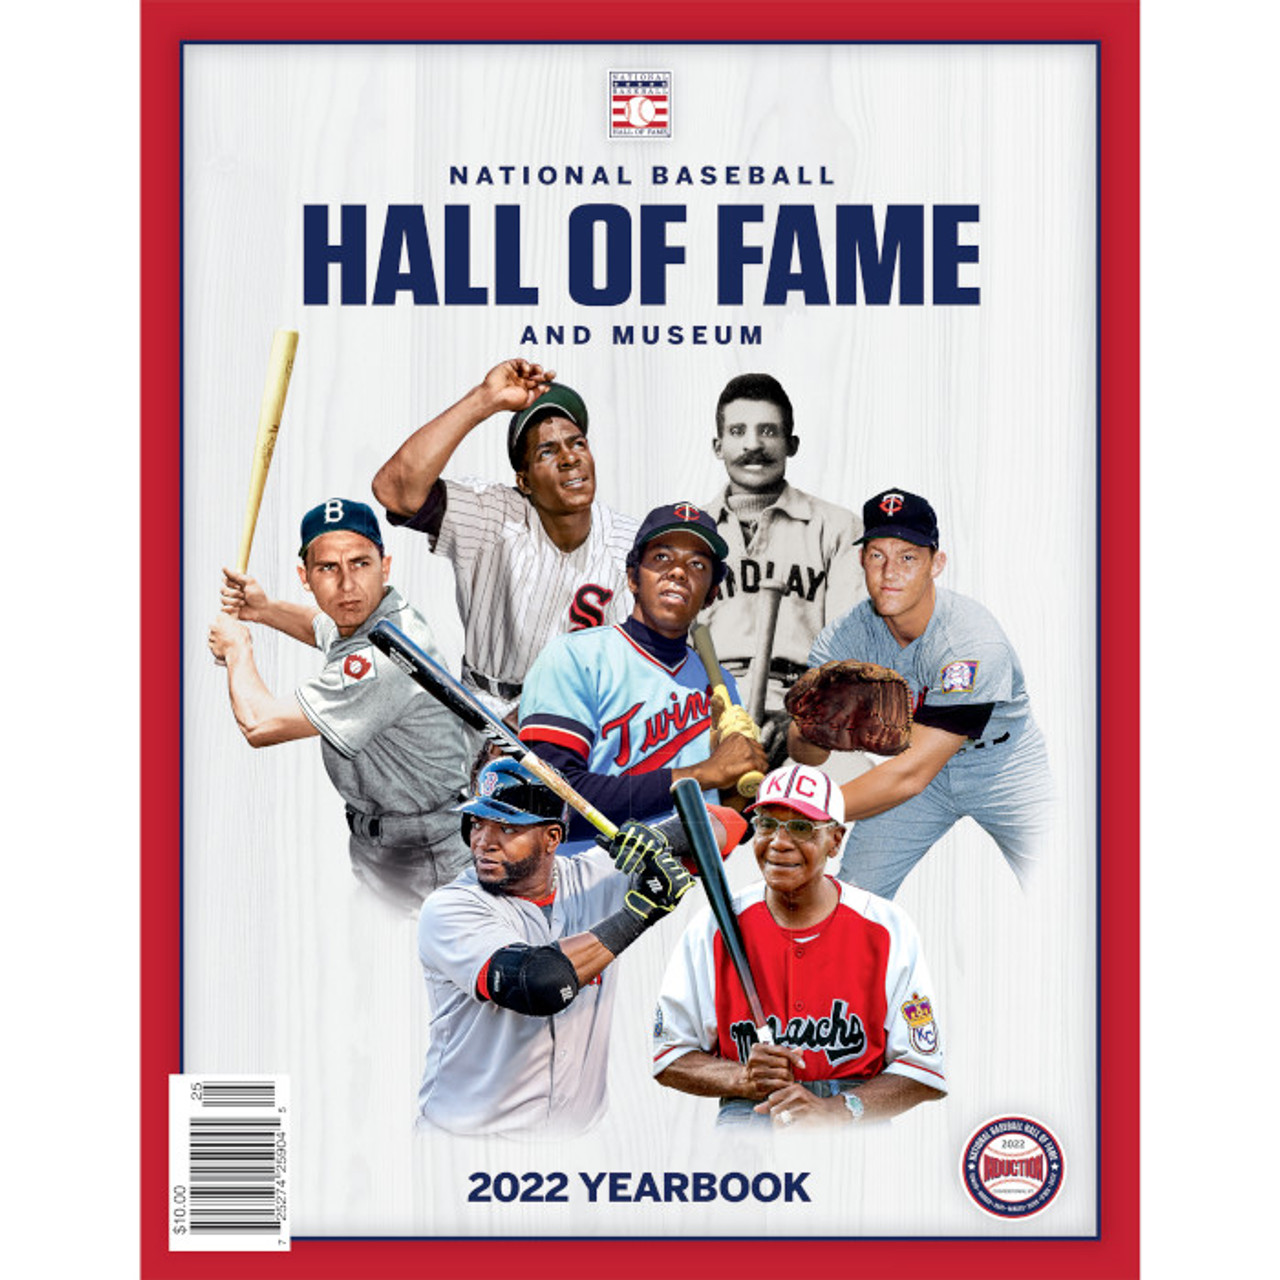 Baseball Hall of Fame 2019: Five crazy stats from the newest Hall